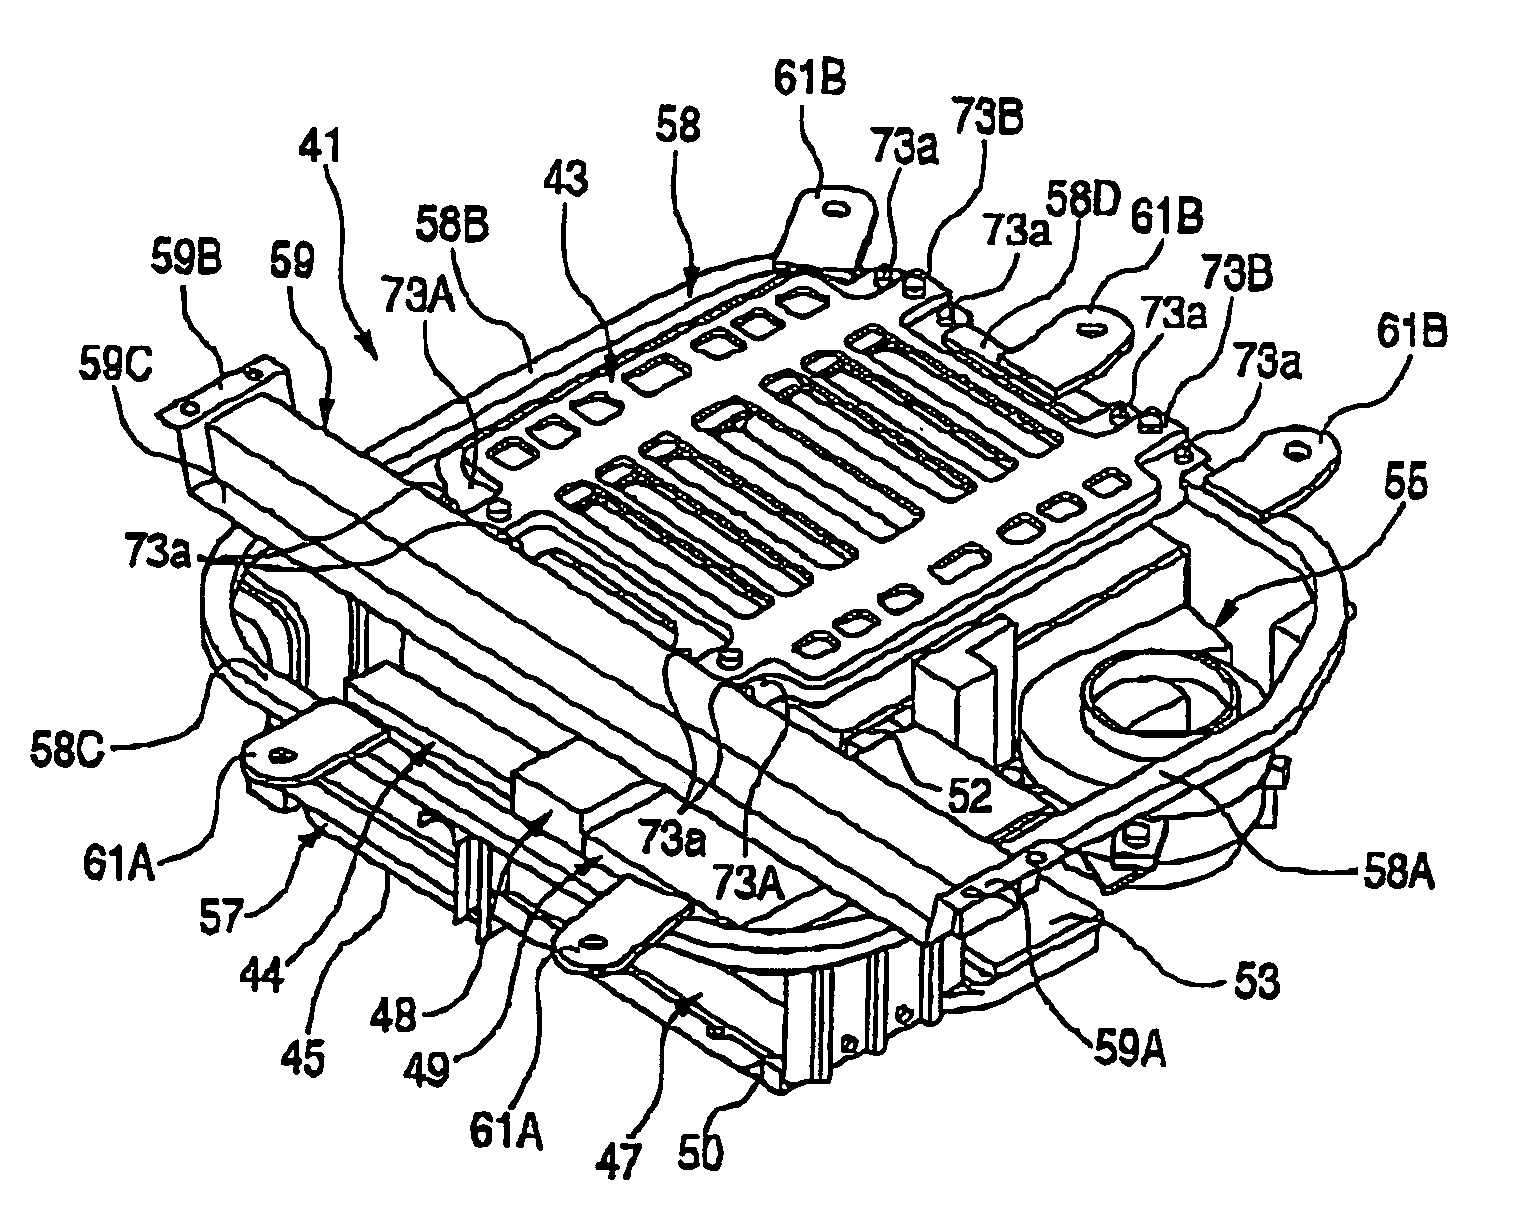 Structure for installing high-voltage equipment component to vehicle